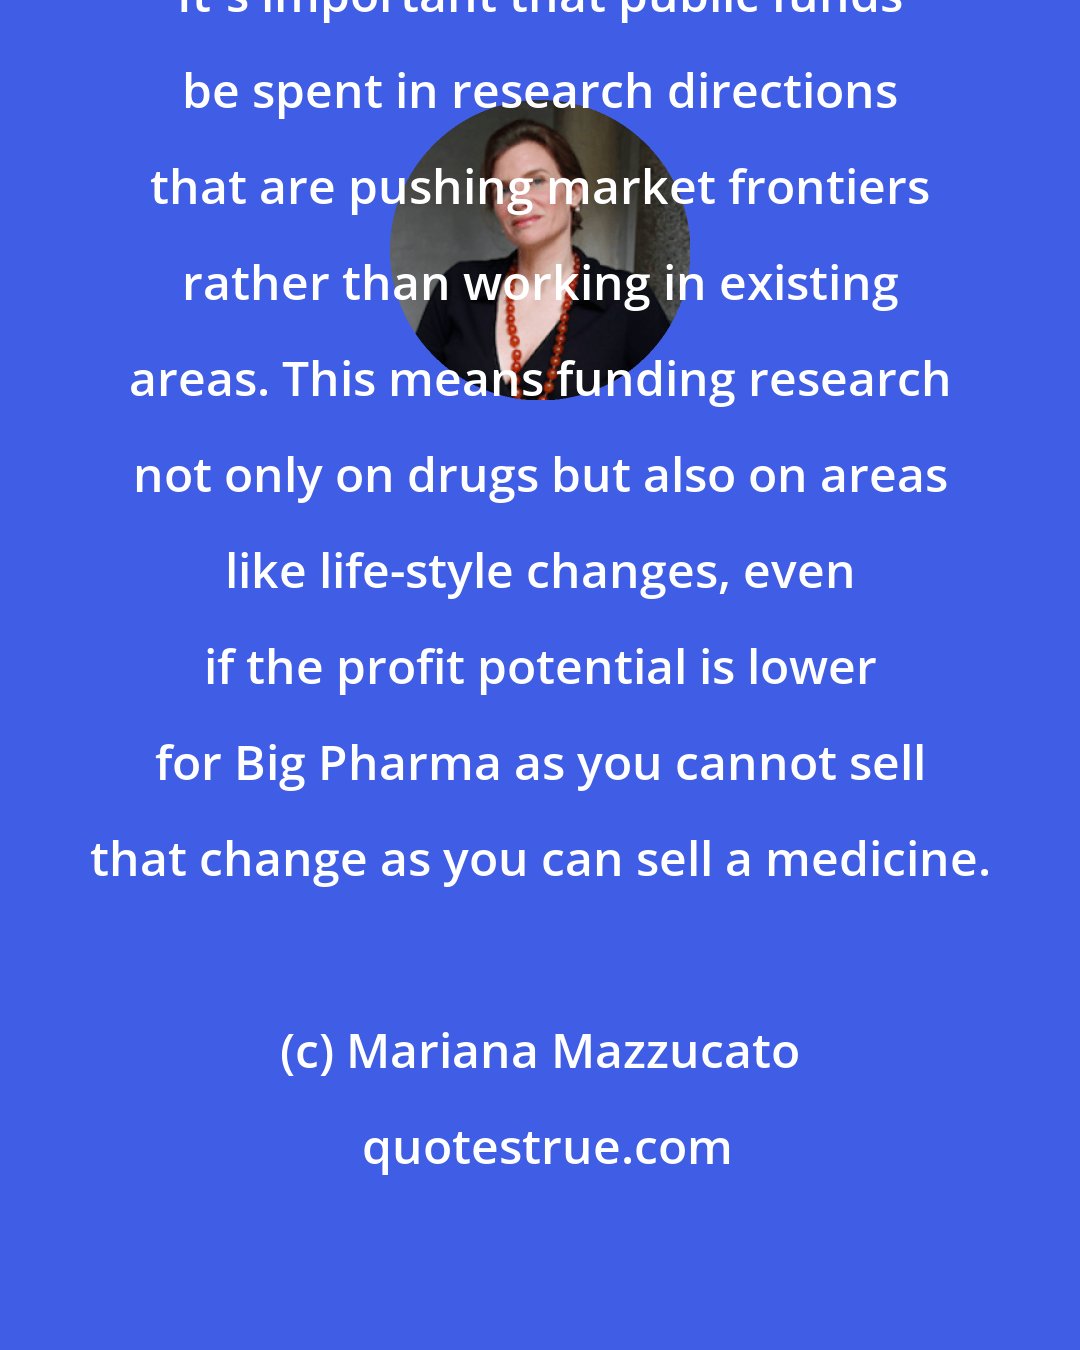 Mariana Mazzucato: It's important that public funds be spent in research directions that are pushing market frontiers rather than working in existing areas. This means funding research not only on drugs but also on areas like life-style changes, even if the profit potential is lower for Big Pharma as you cannot sell that change as you can sell a medicine.